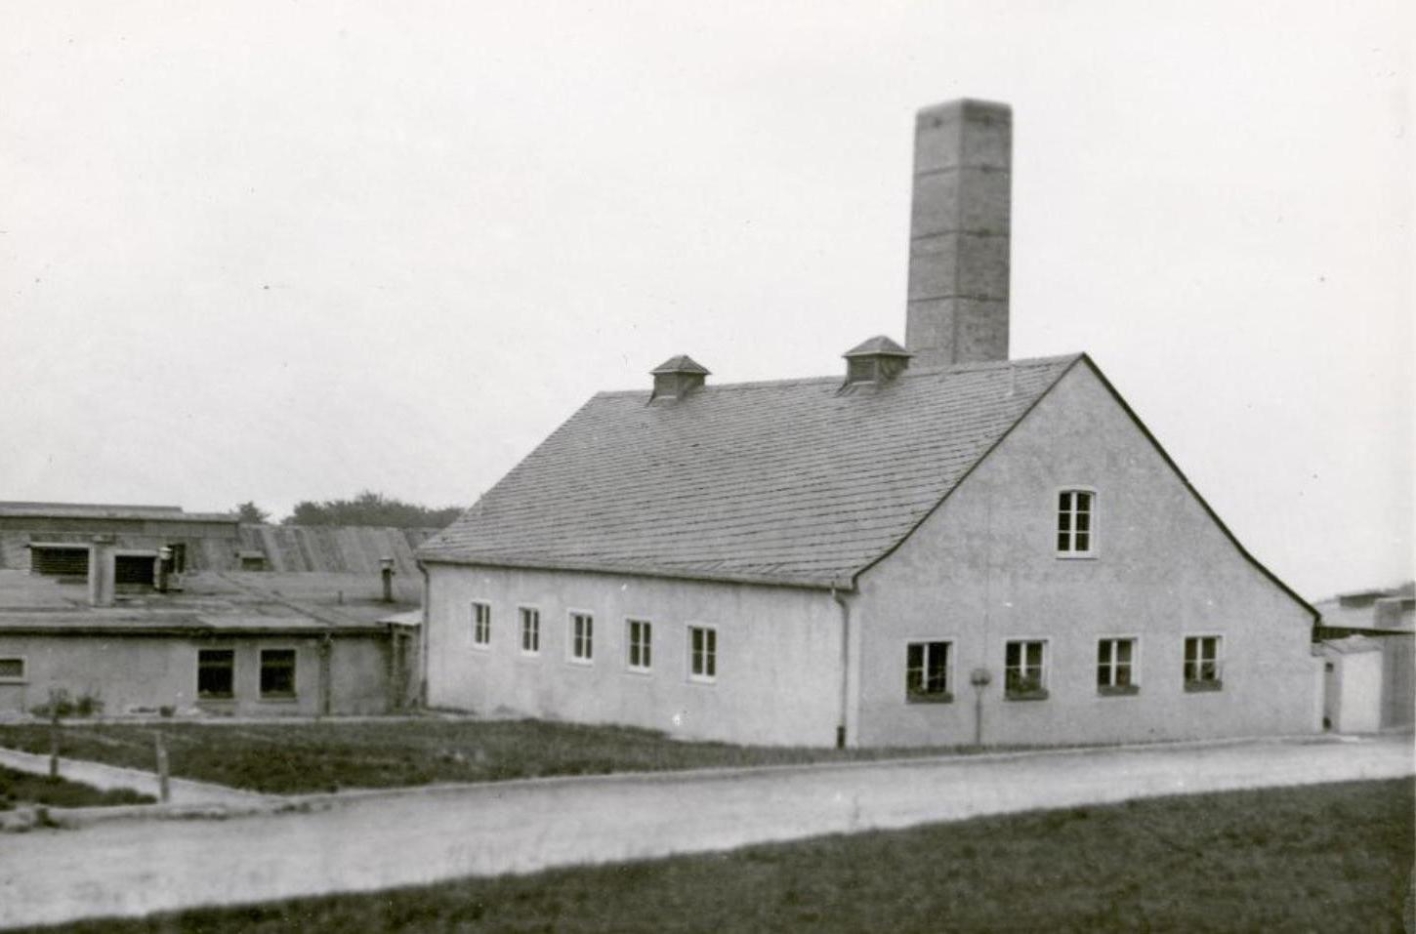  The crematorium building from the outside. The brick chimney rises in the center of the picture.